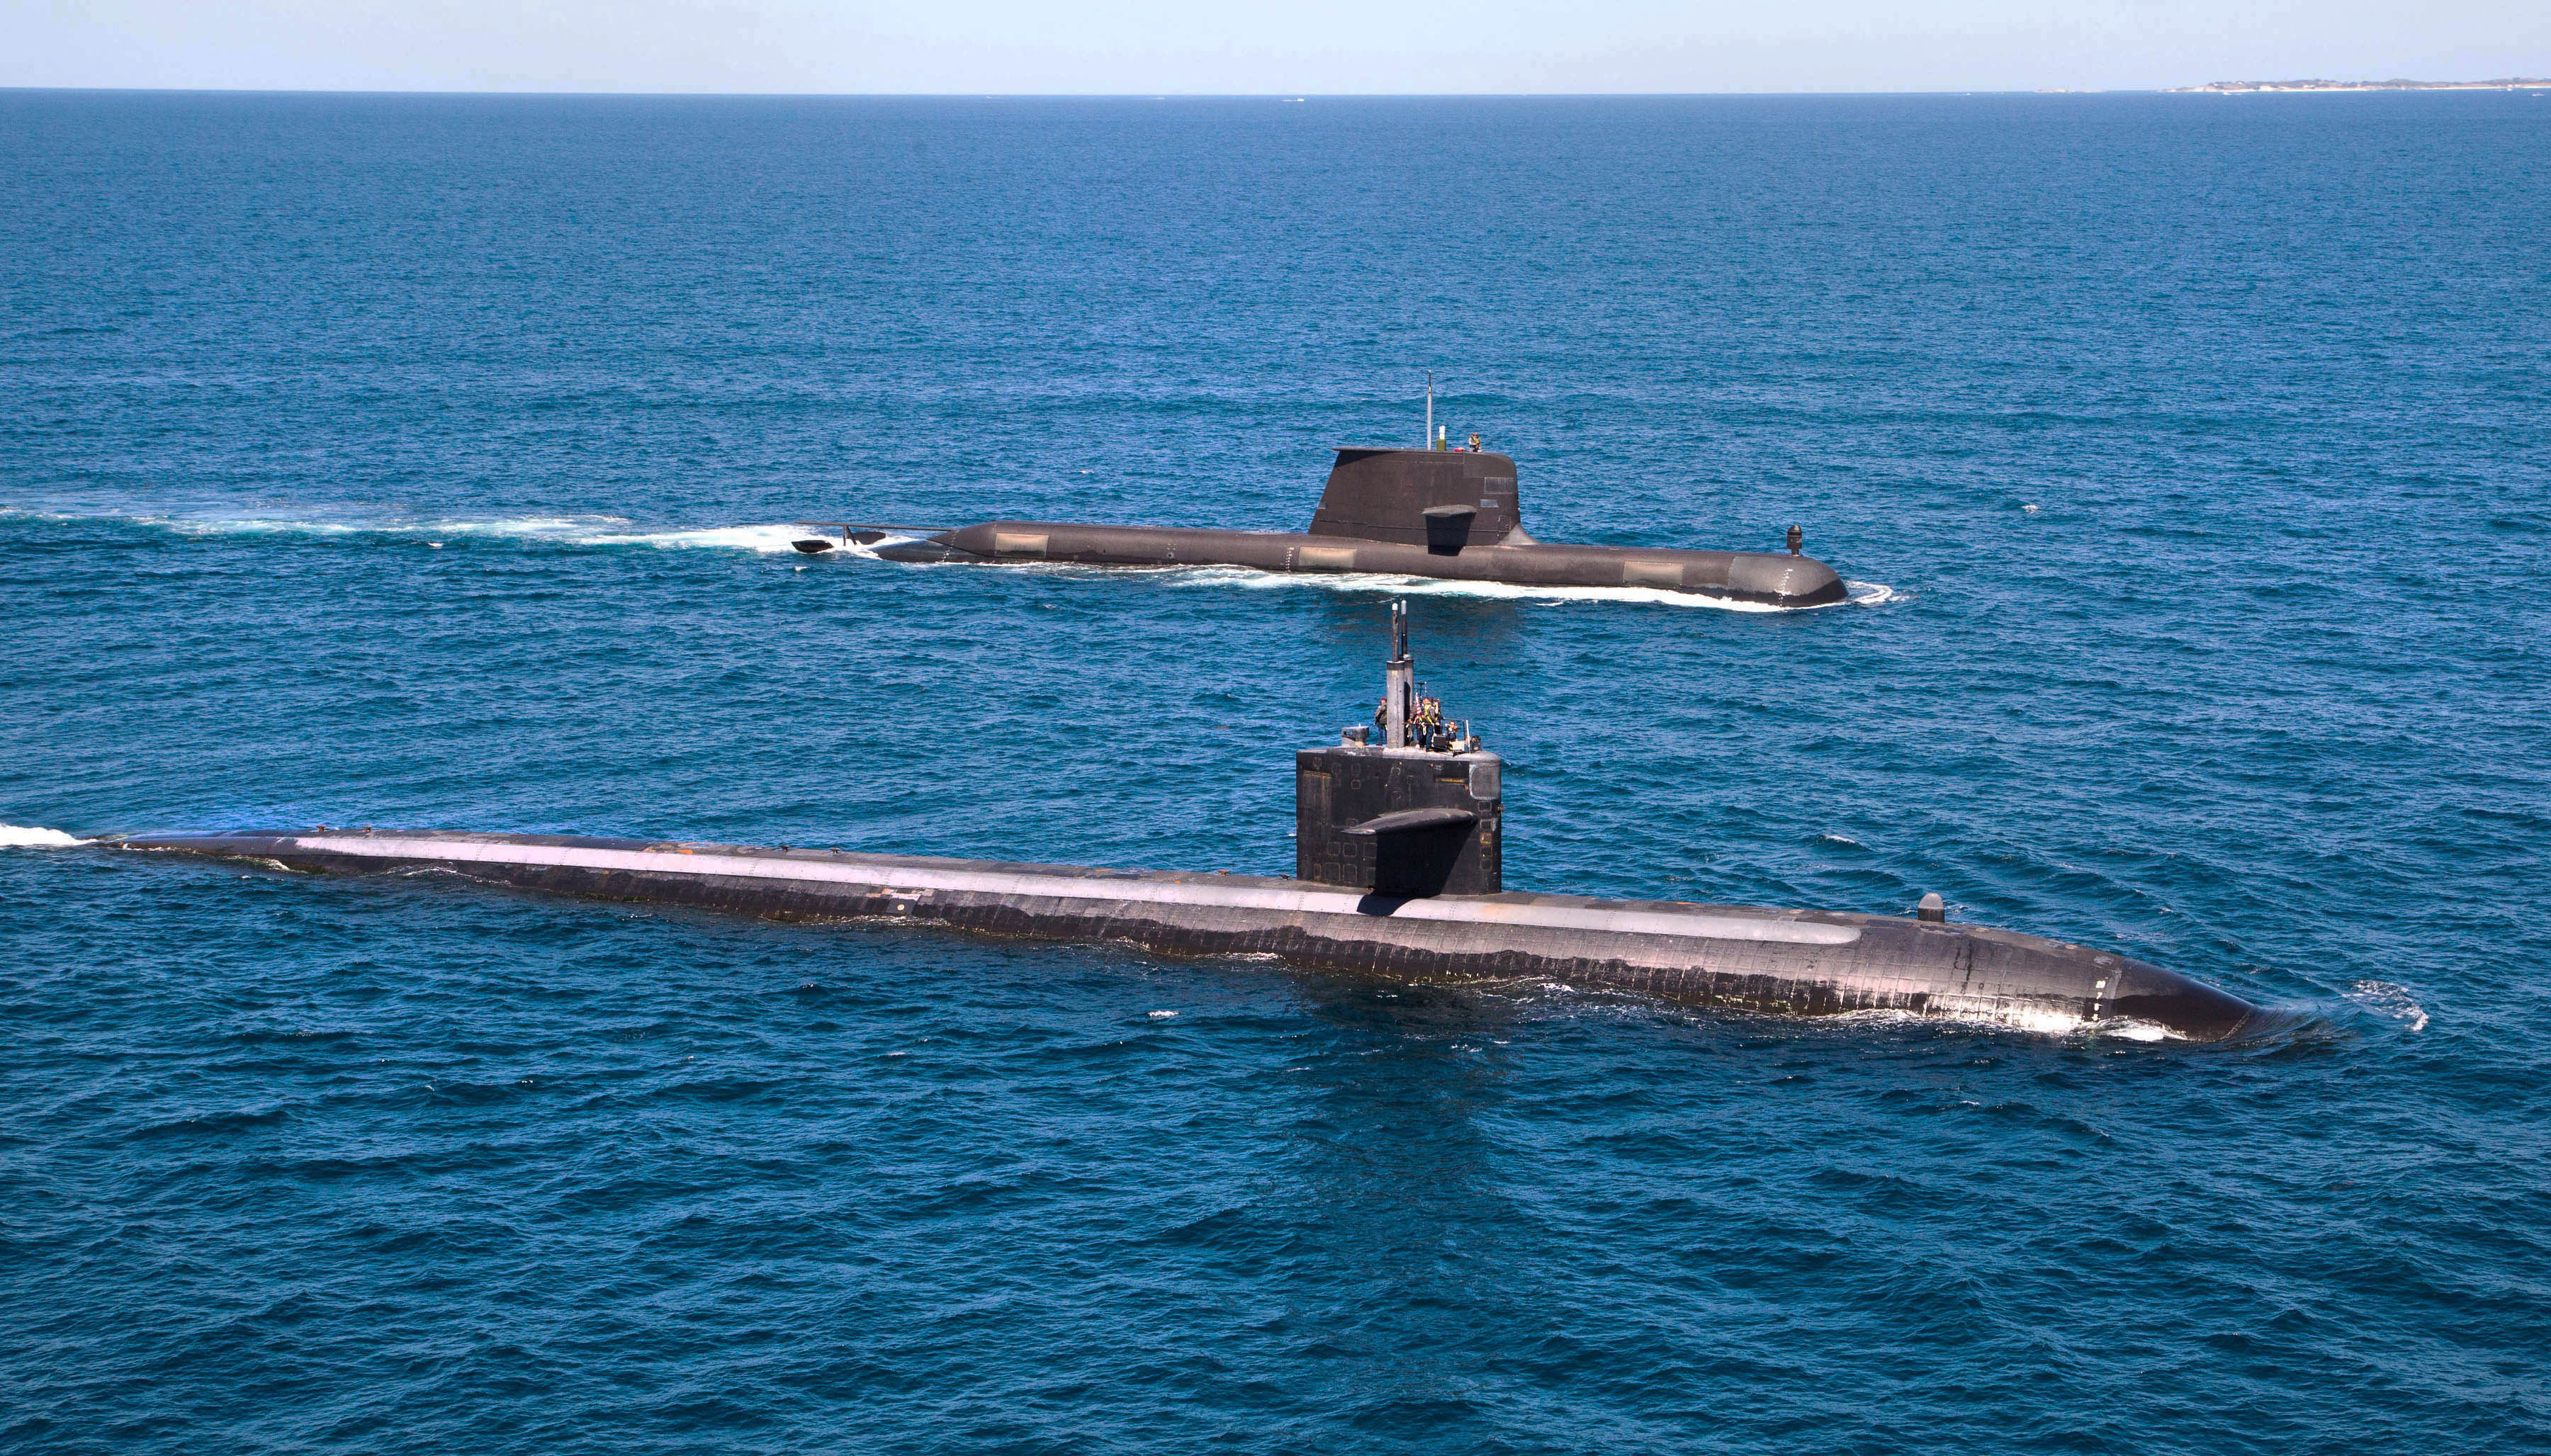 Los Angeles-class fast attack submarine USS Albuquerque (SSN-706) and Royal Australian Navy Collins-class submarine HMAS Rankin (SSG-78) operate together in waters off Rottnest Island, Western Australia on March 4, 2015.